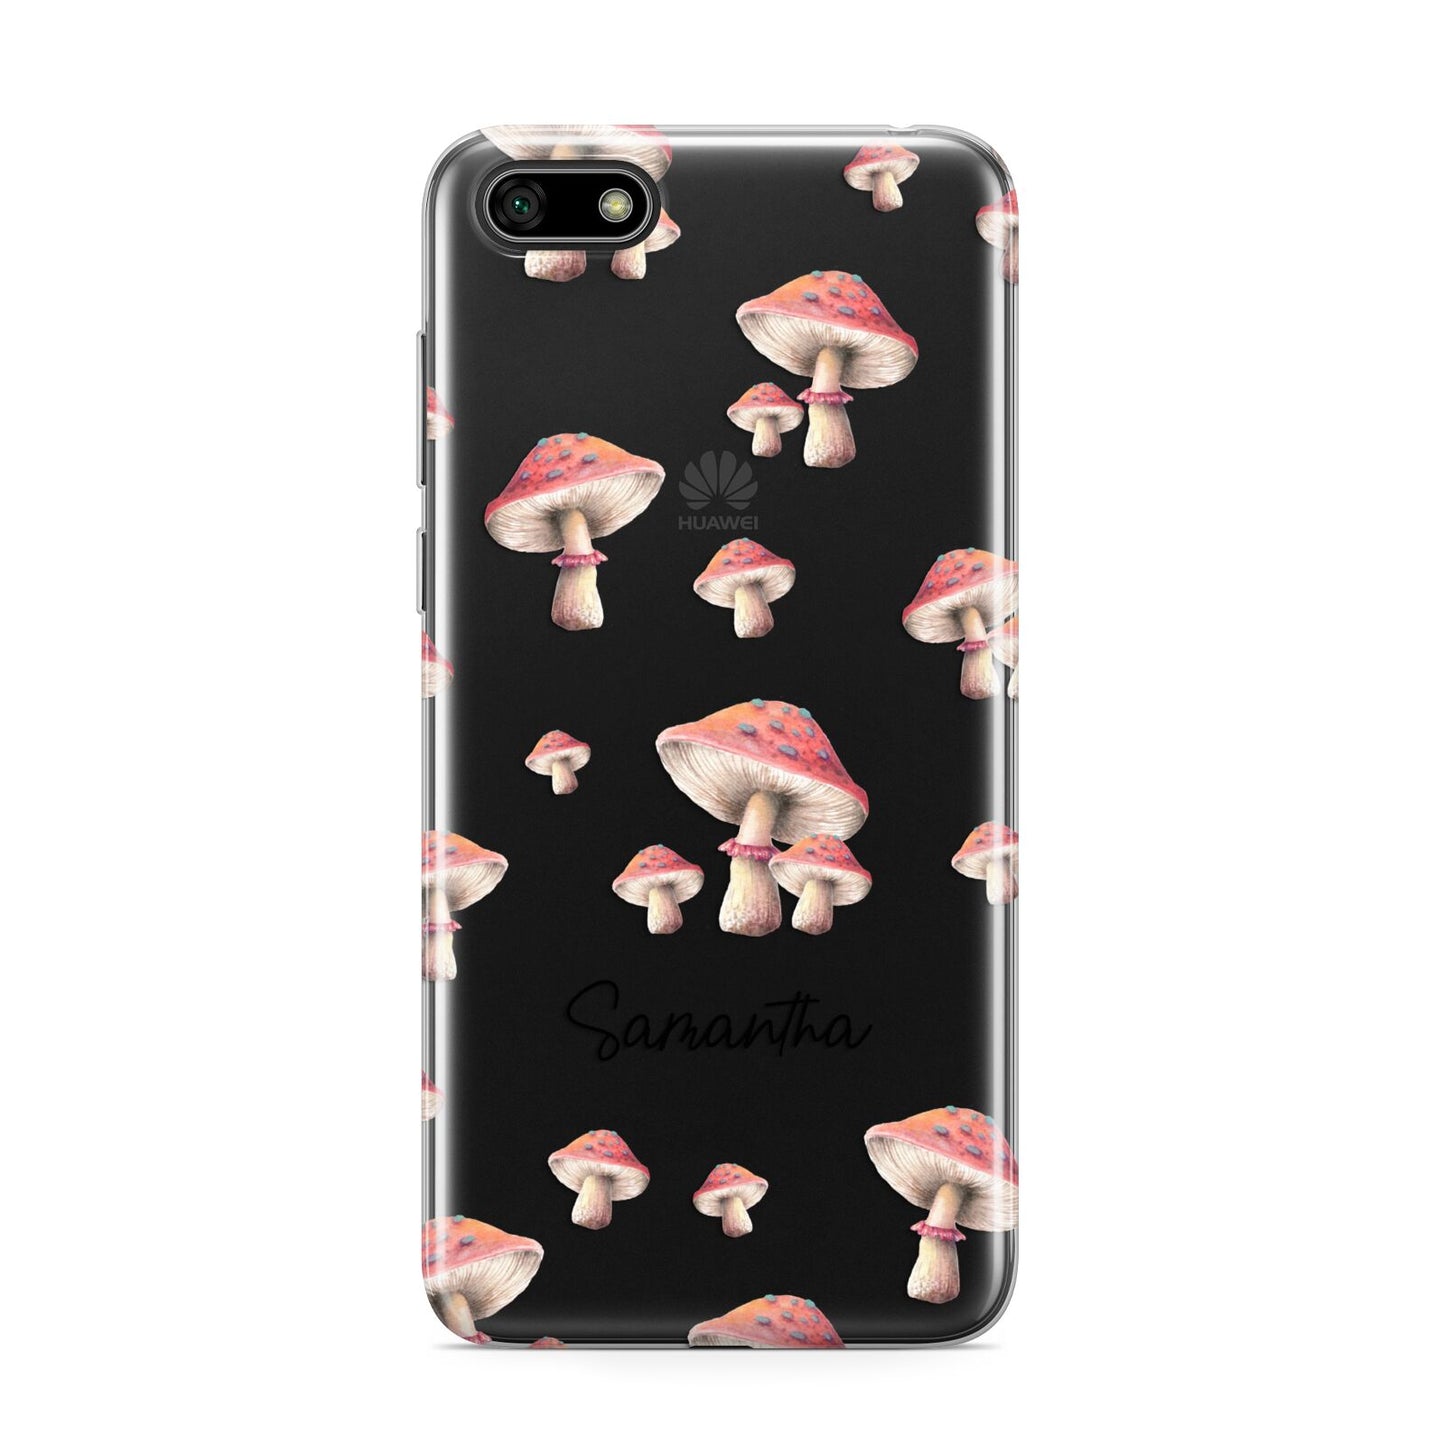 Mushroom Illustrations with Name Huawei Y5 Prime 2018 Phone Case